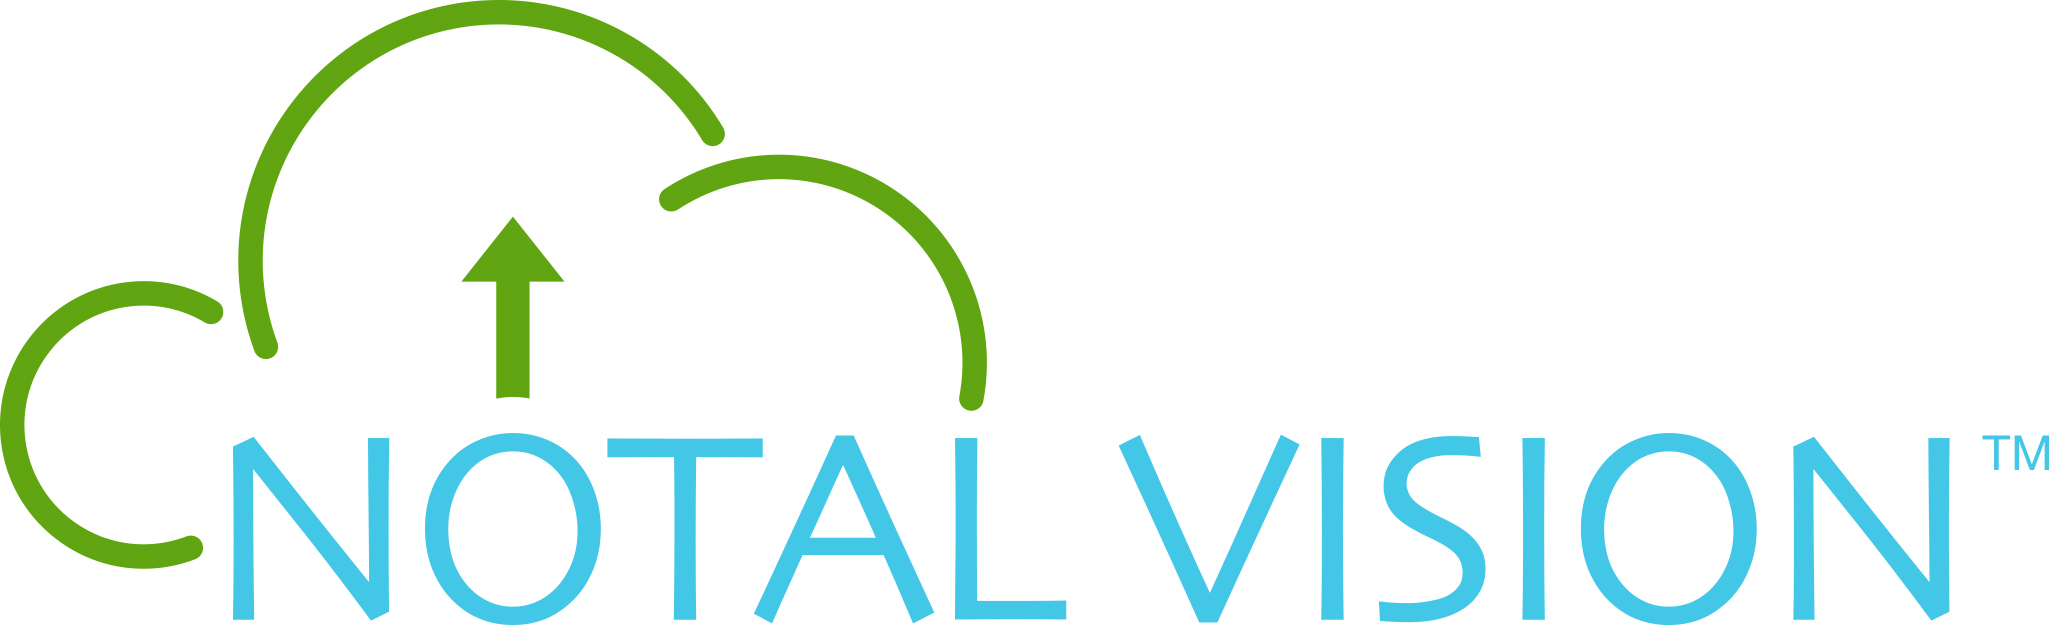 Notal Vision secures